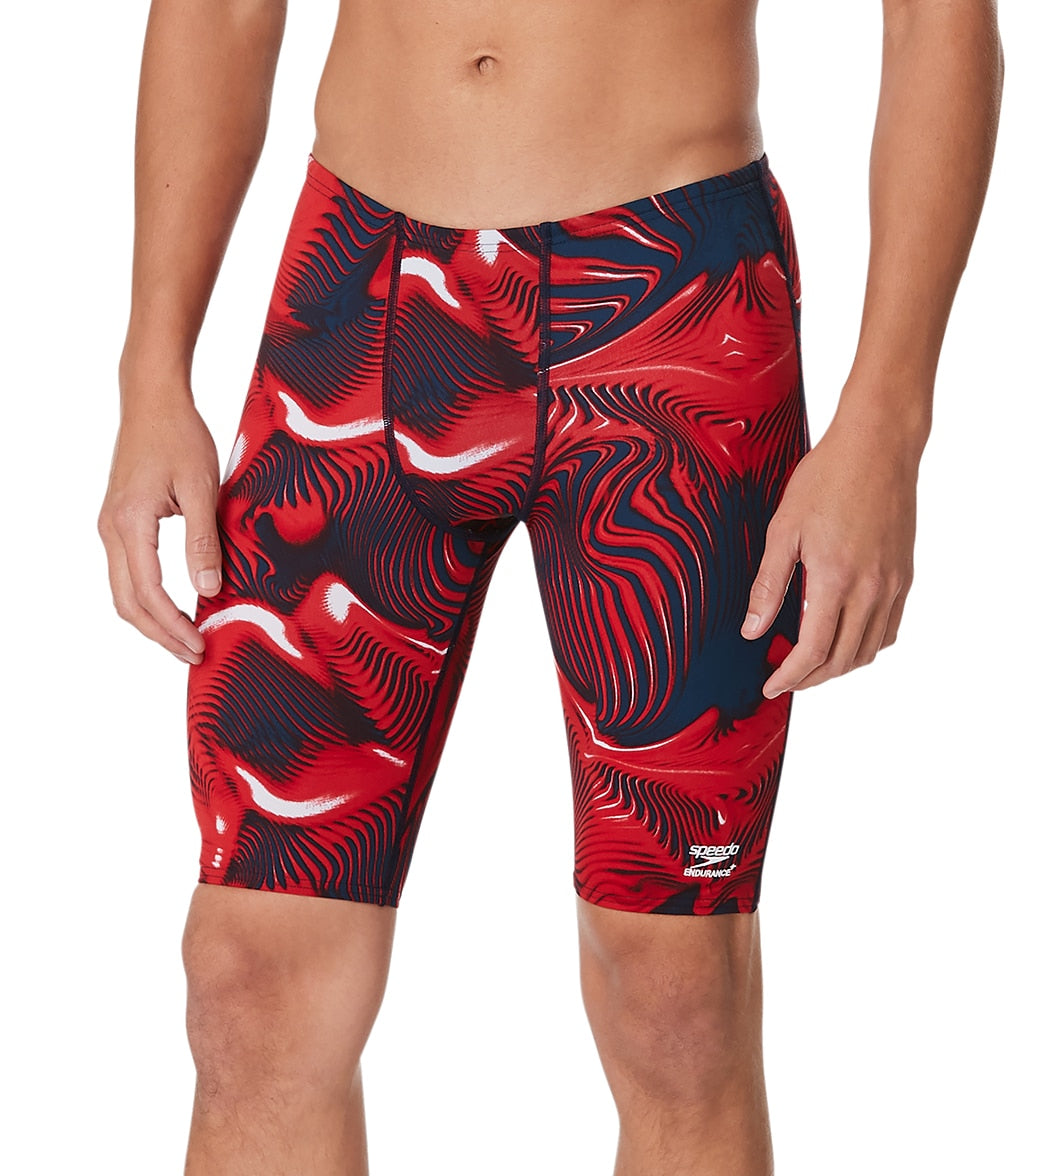 Speedo Men's Fusion Vibe Jammer Swimsuit - Red/White/Blue 22 Polyester/Pbt - Swimoutlet.com